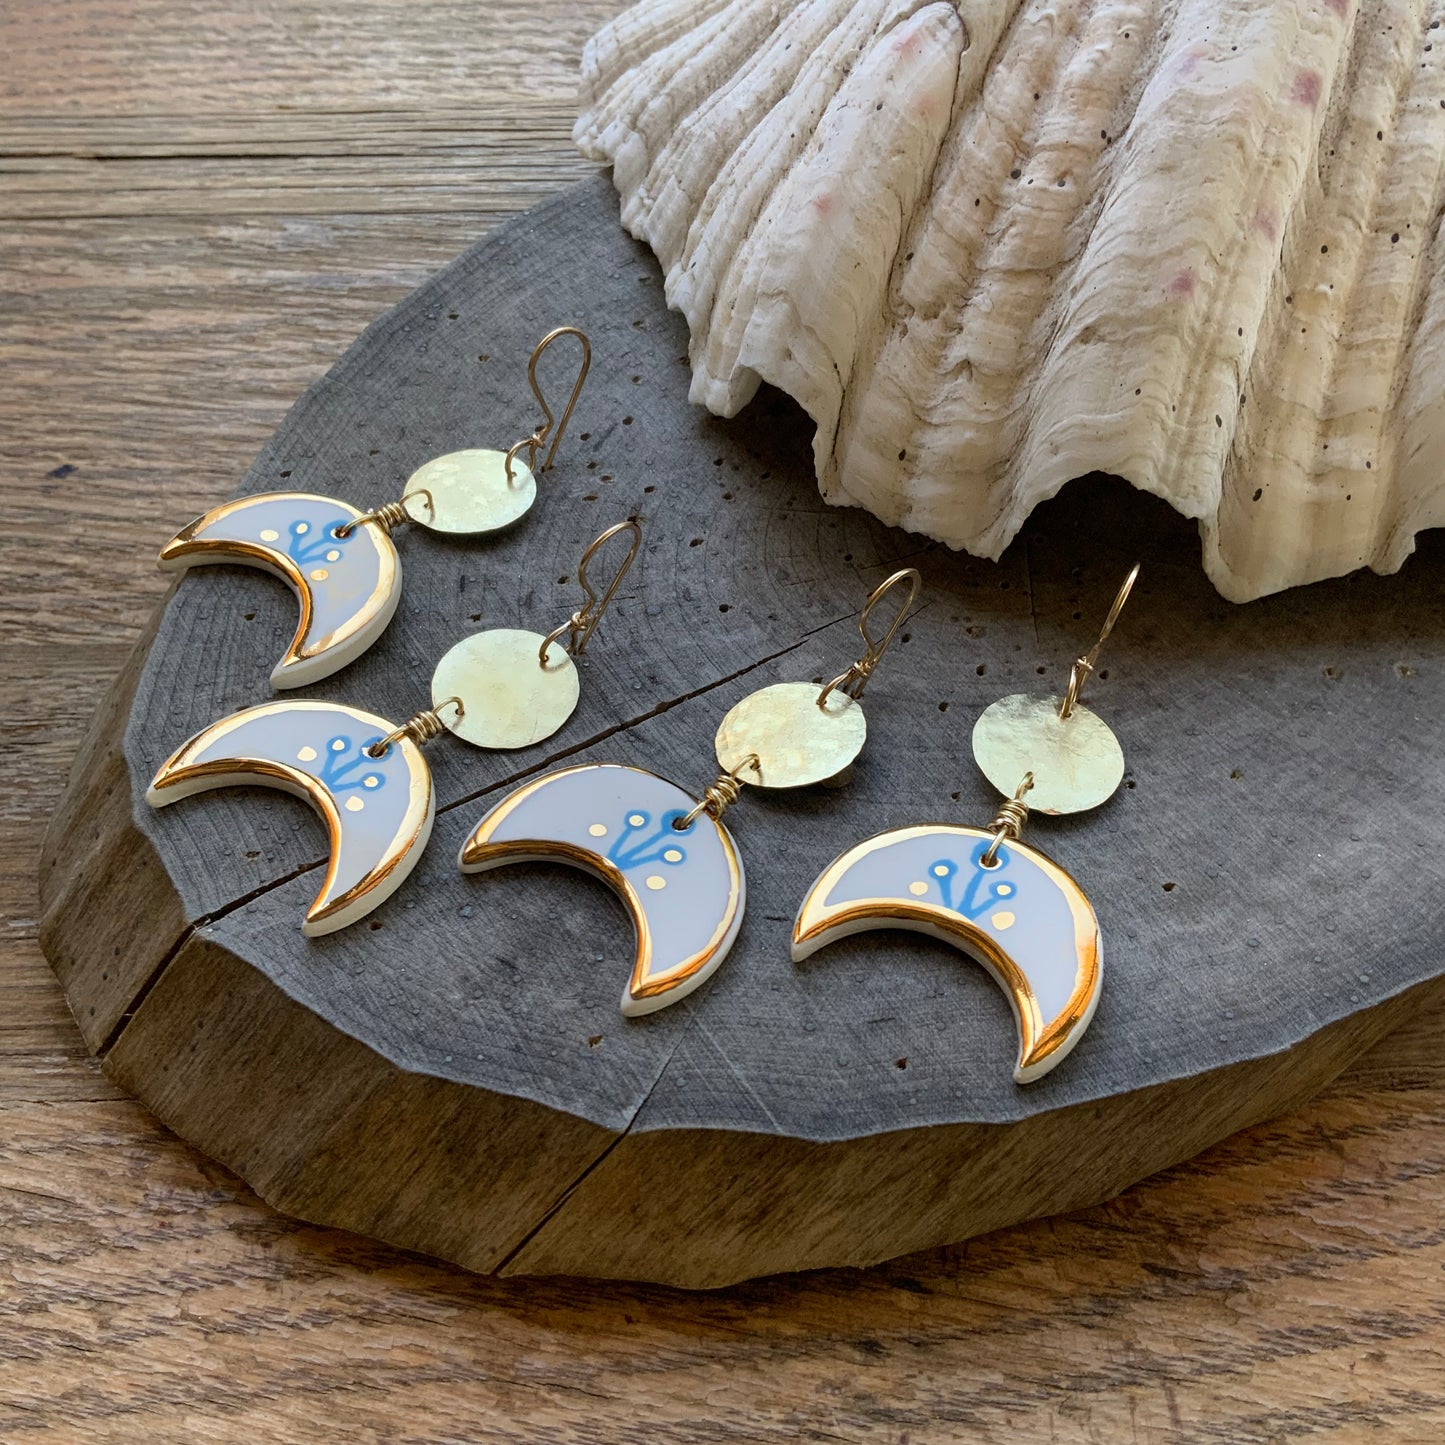 Ceramic Crescent moon and brass coin earrings